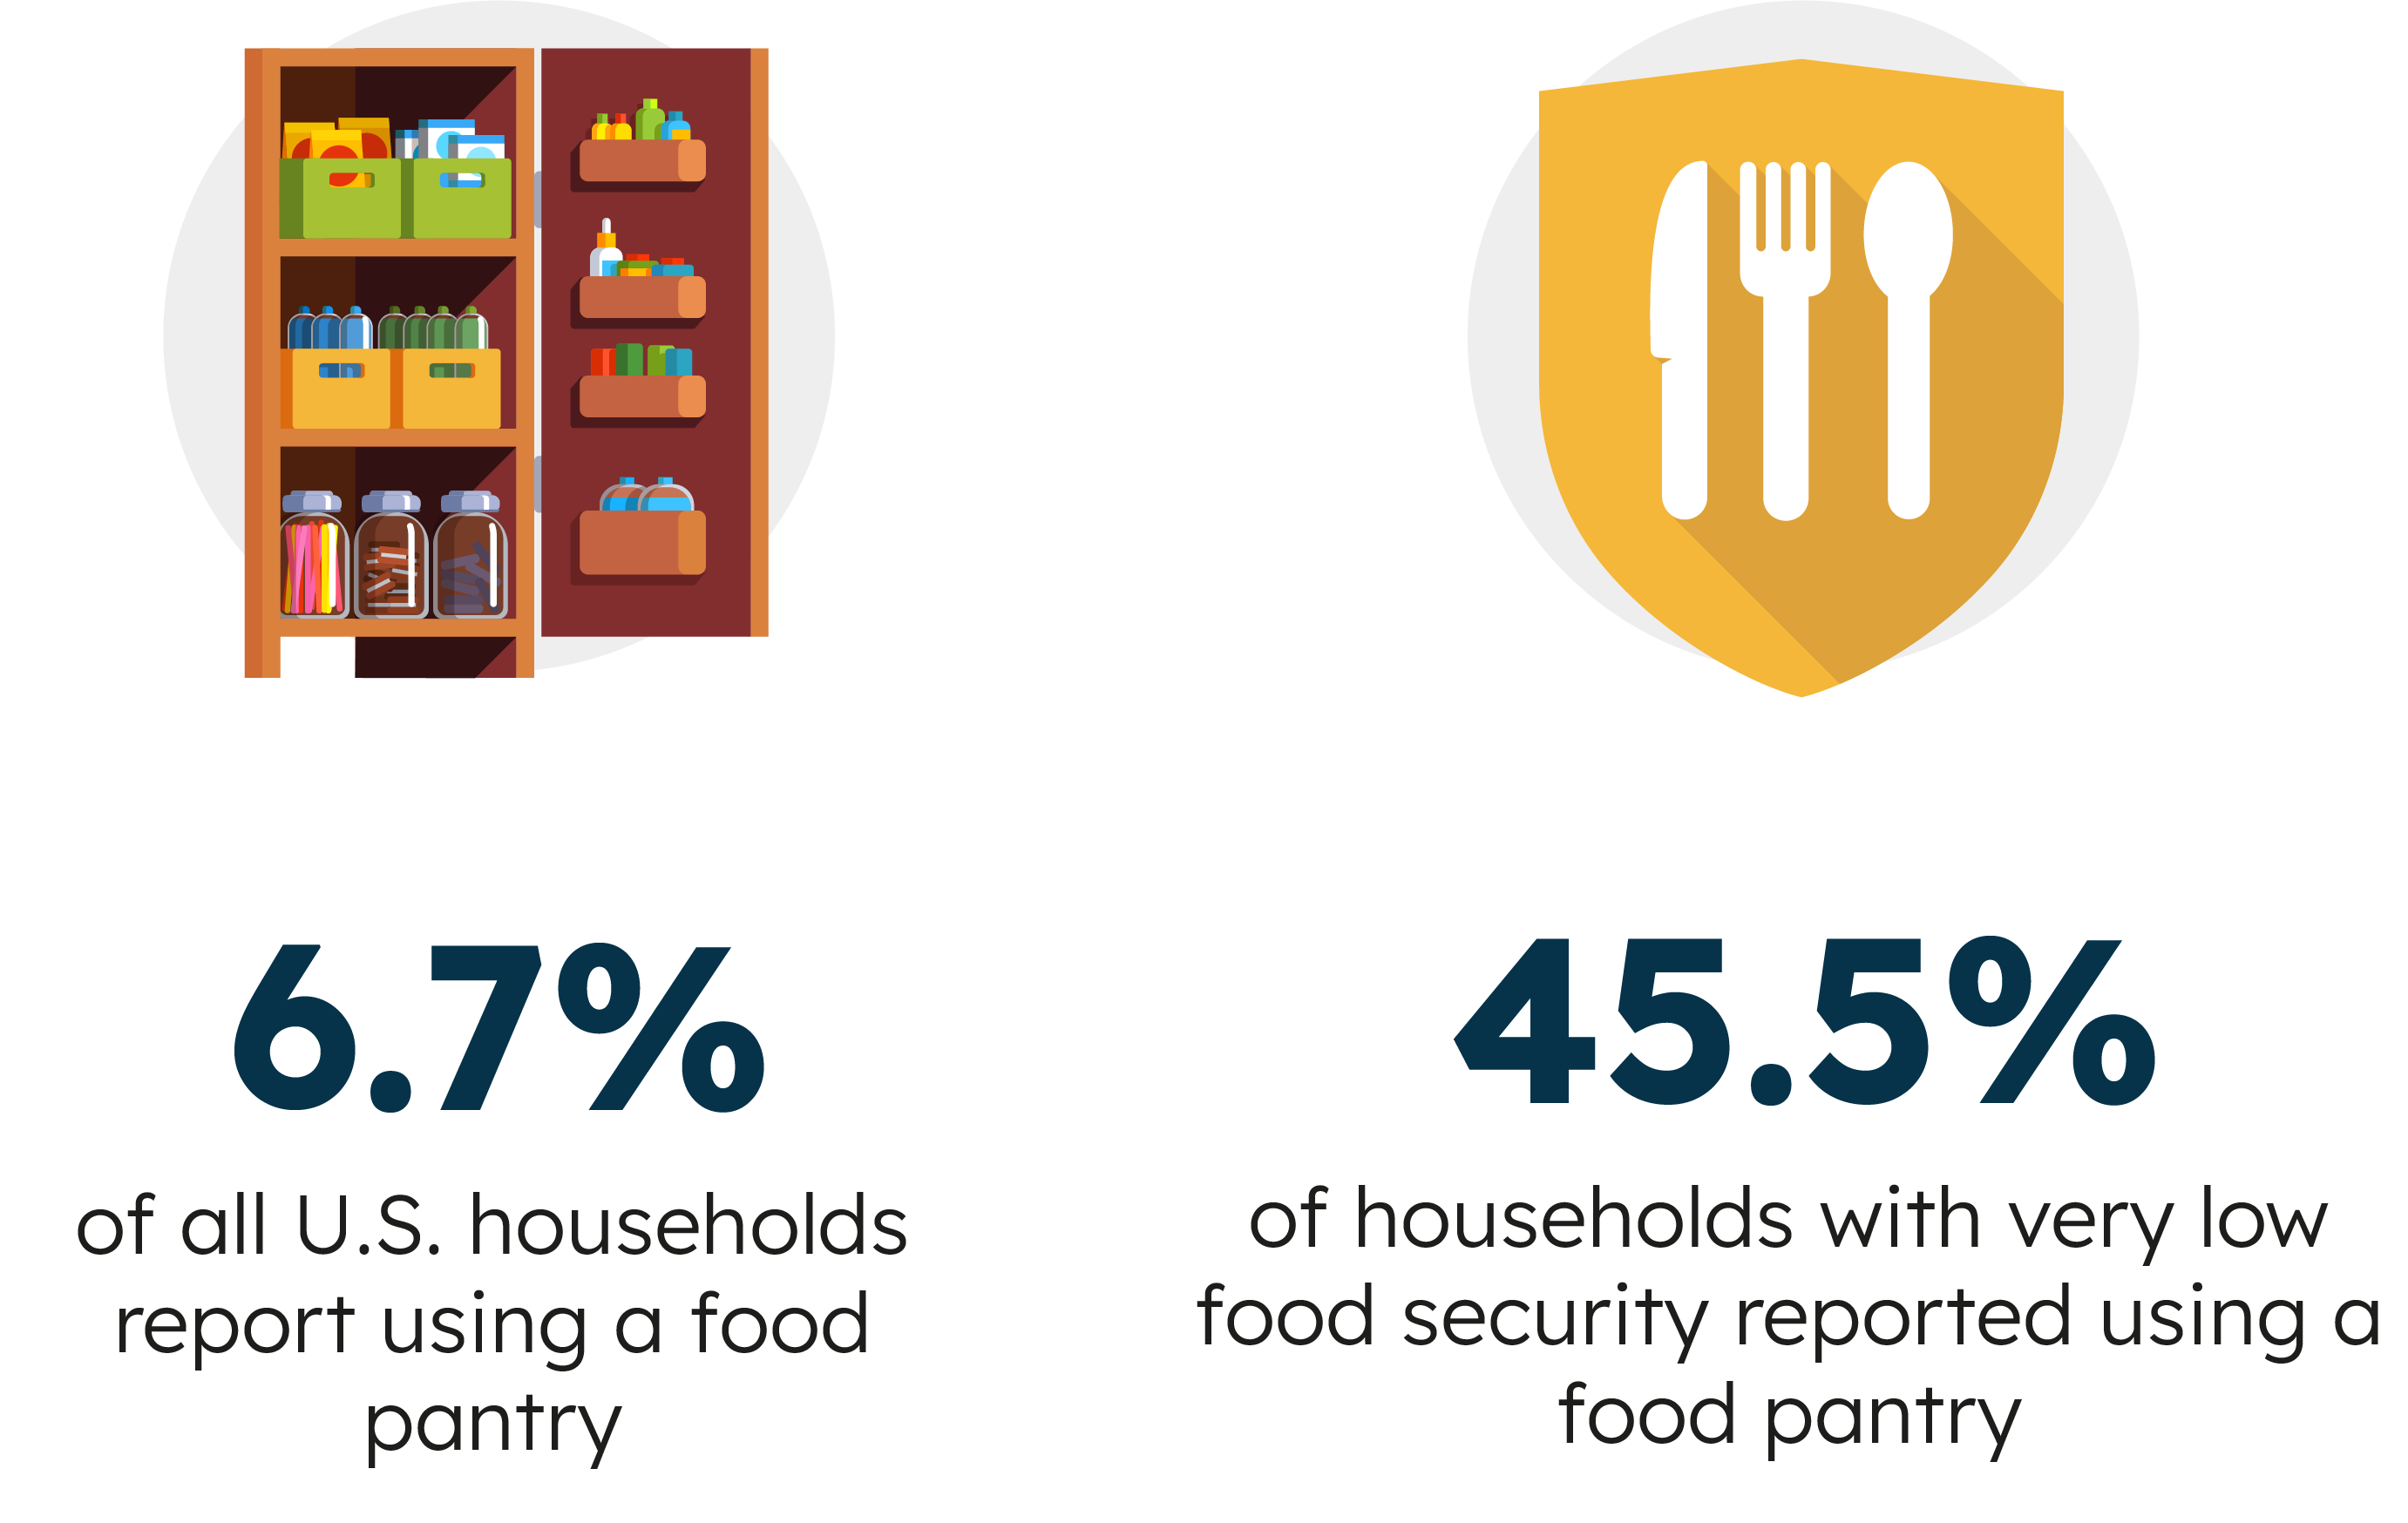 statistics showing US households that use a pantry